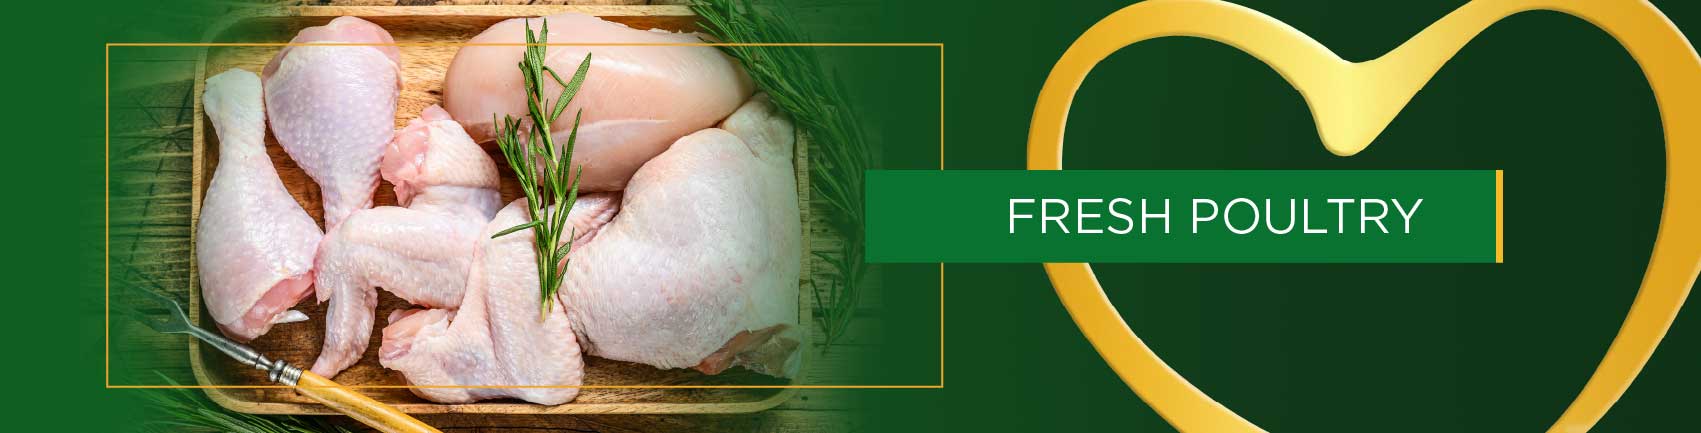 Fresh Poultry - Banner